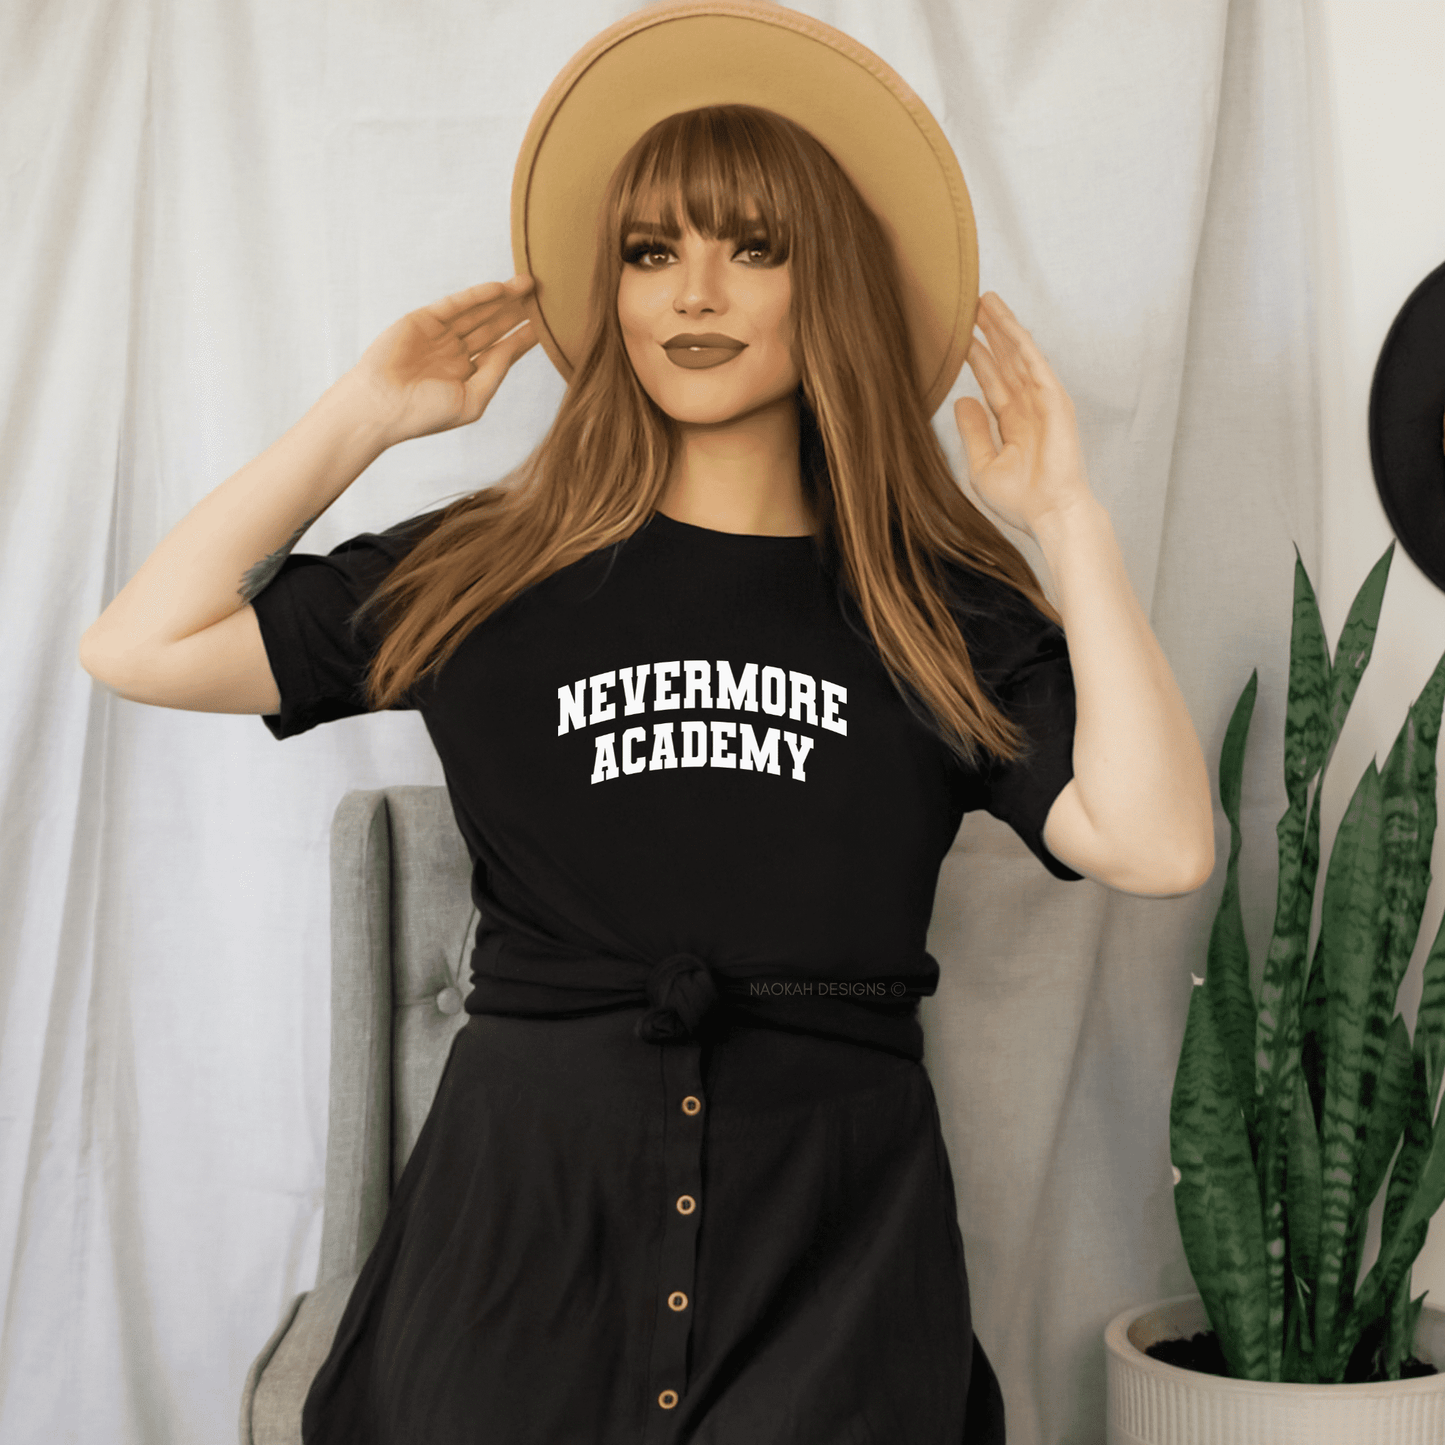 Nevermore Academy Shirt, Addams family Sweatshirt, Wednesday Addams , Wednesday Adams, Wednesday Addams dancing, Gothic Shirt